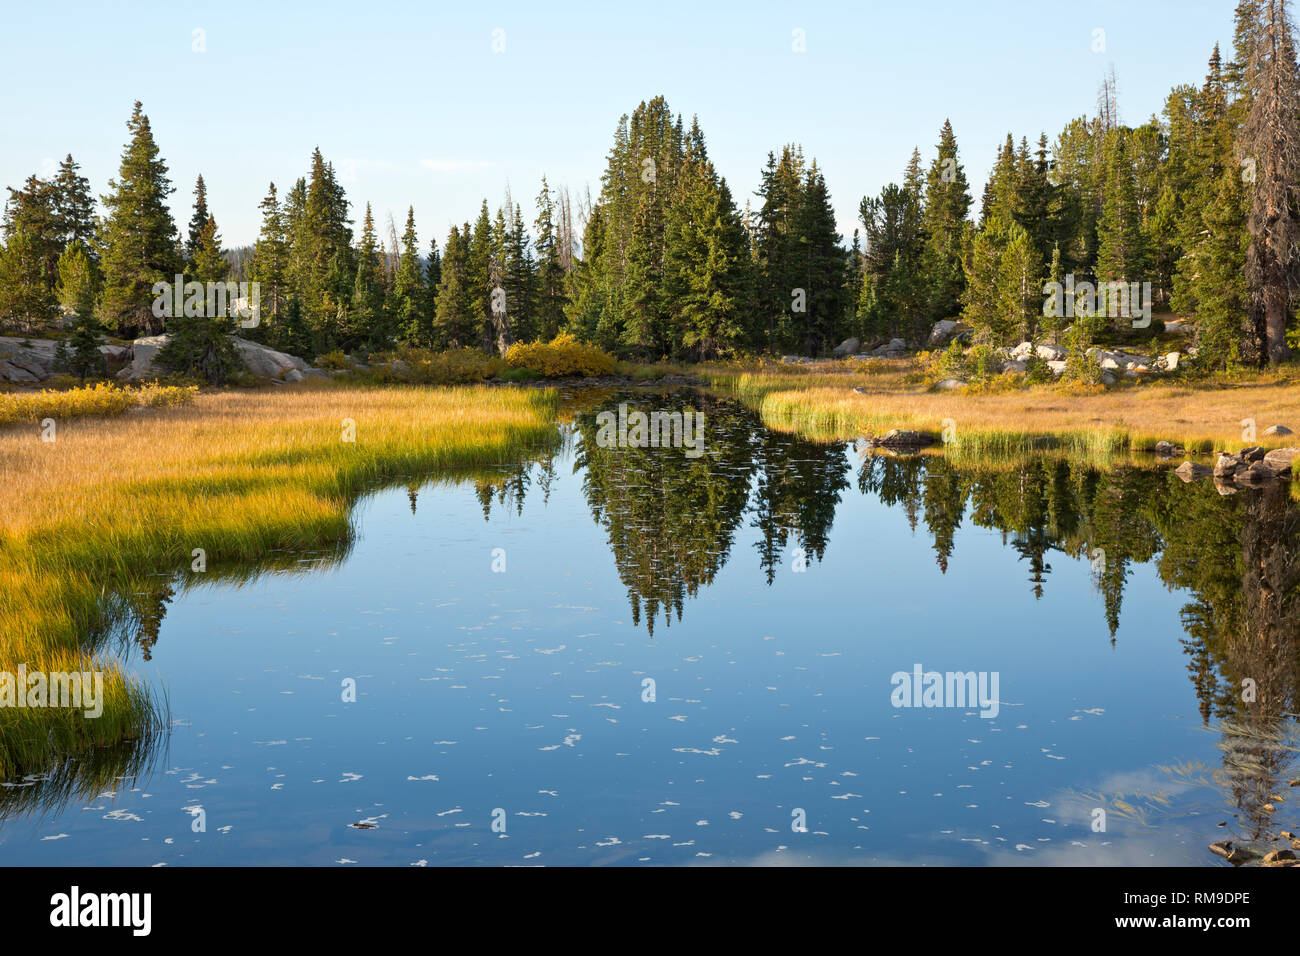 WY03718-00...WYOMING - Reflections in a small pond passed along the Beartooth Highway in the Shoshone National Forest. Stock Photo